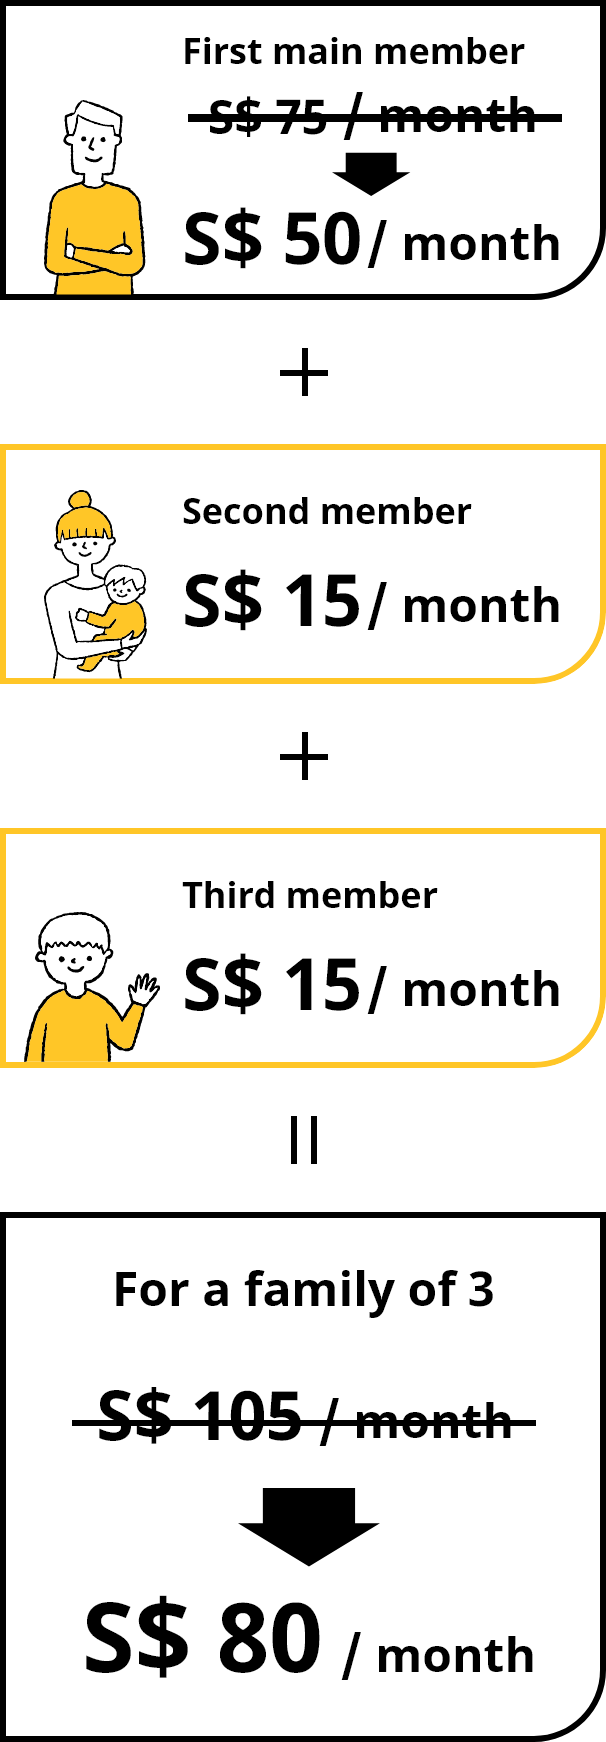 First main member S$ 75 / month Second member S$ 15 / Third member S$ 15 / month For a family of 3 S$ 105 / month Cost per pax S$ 105 / month